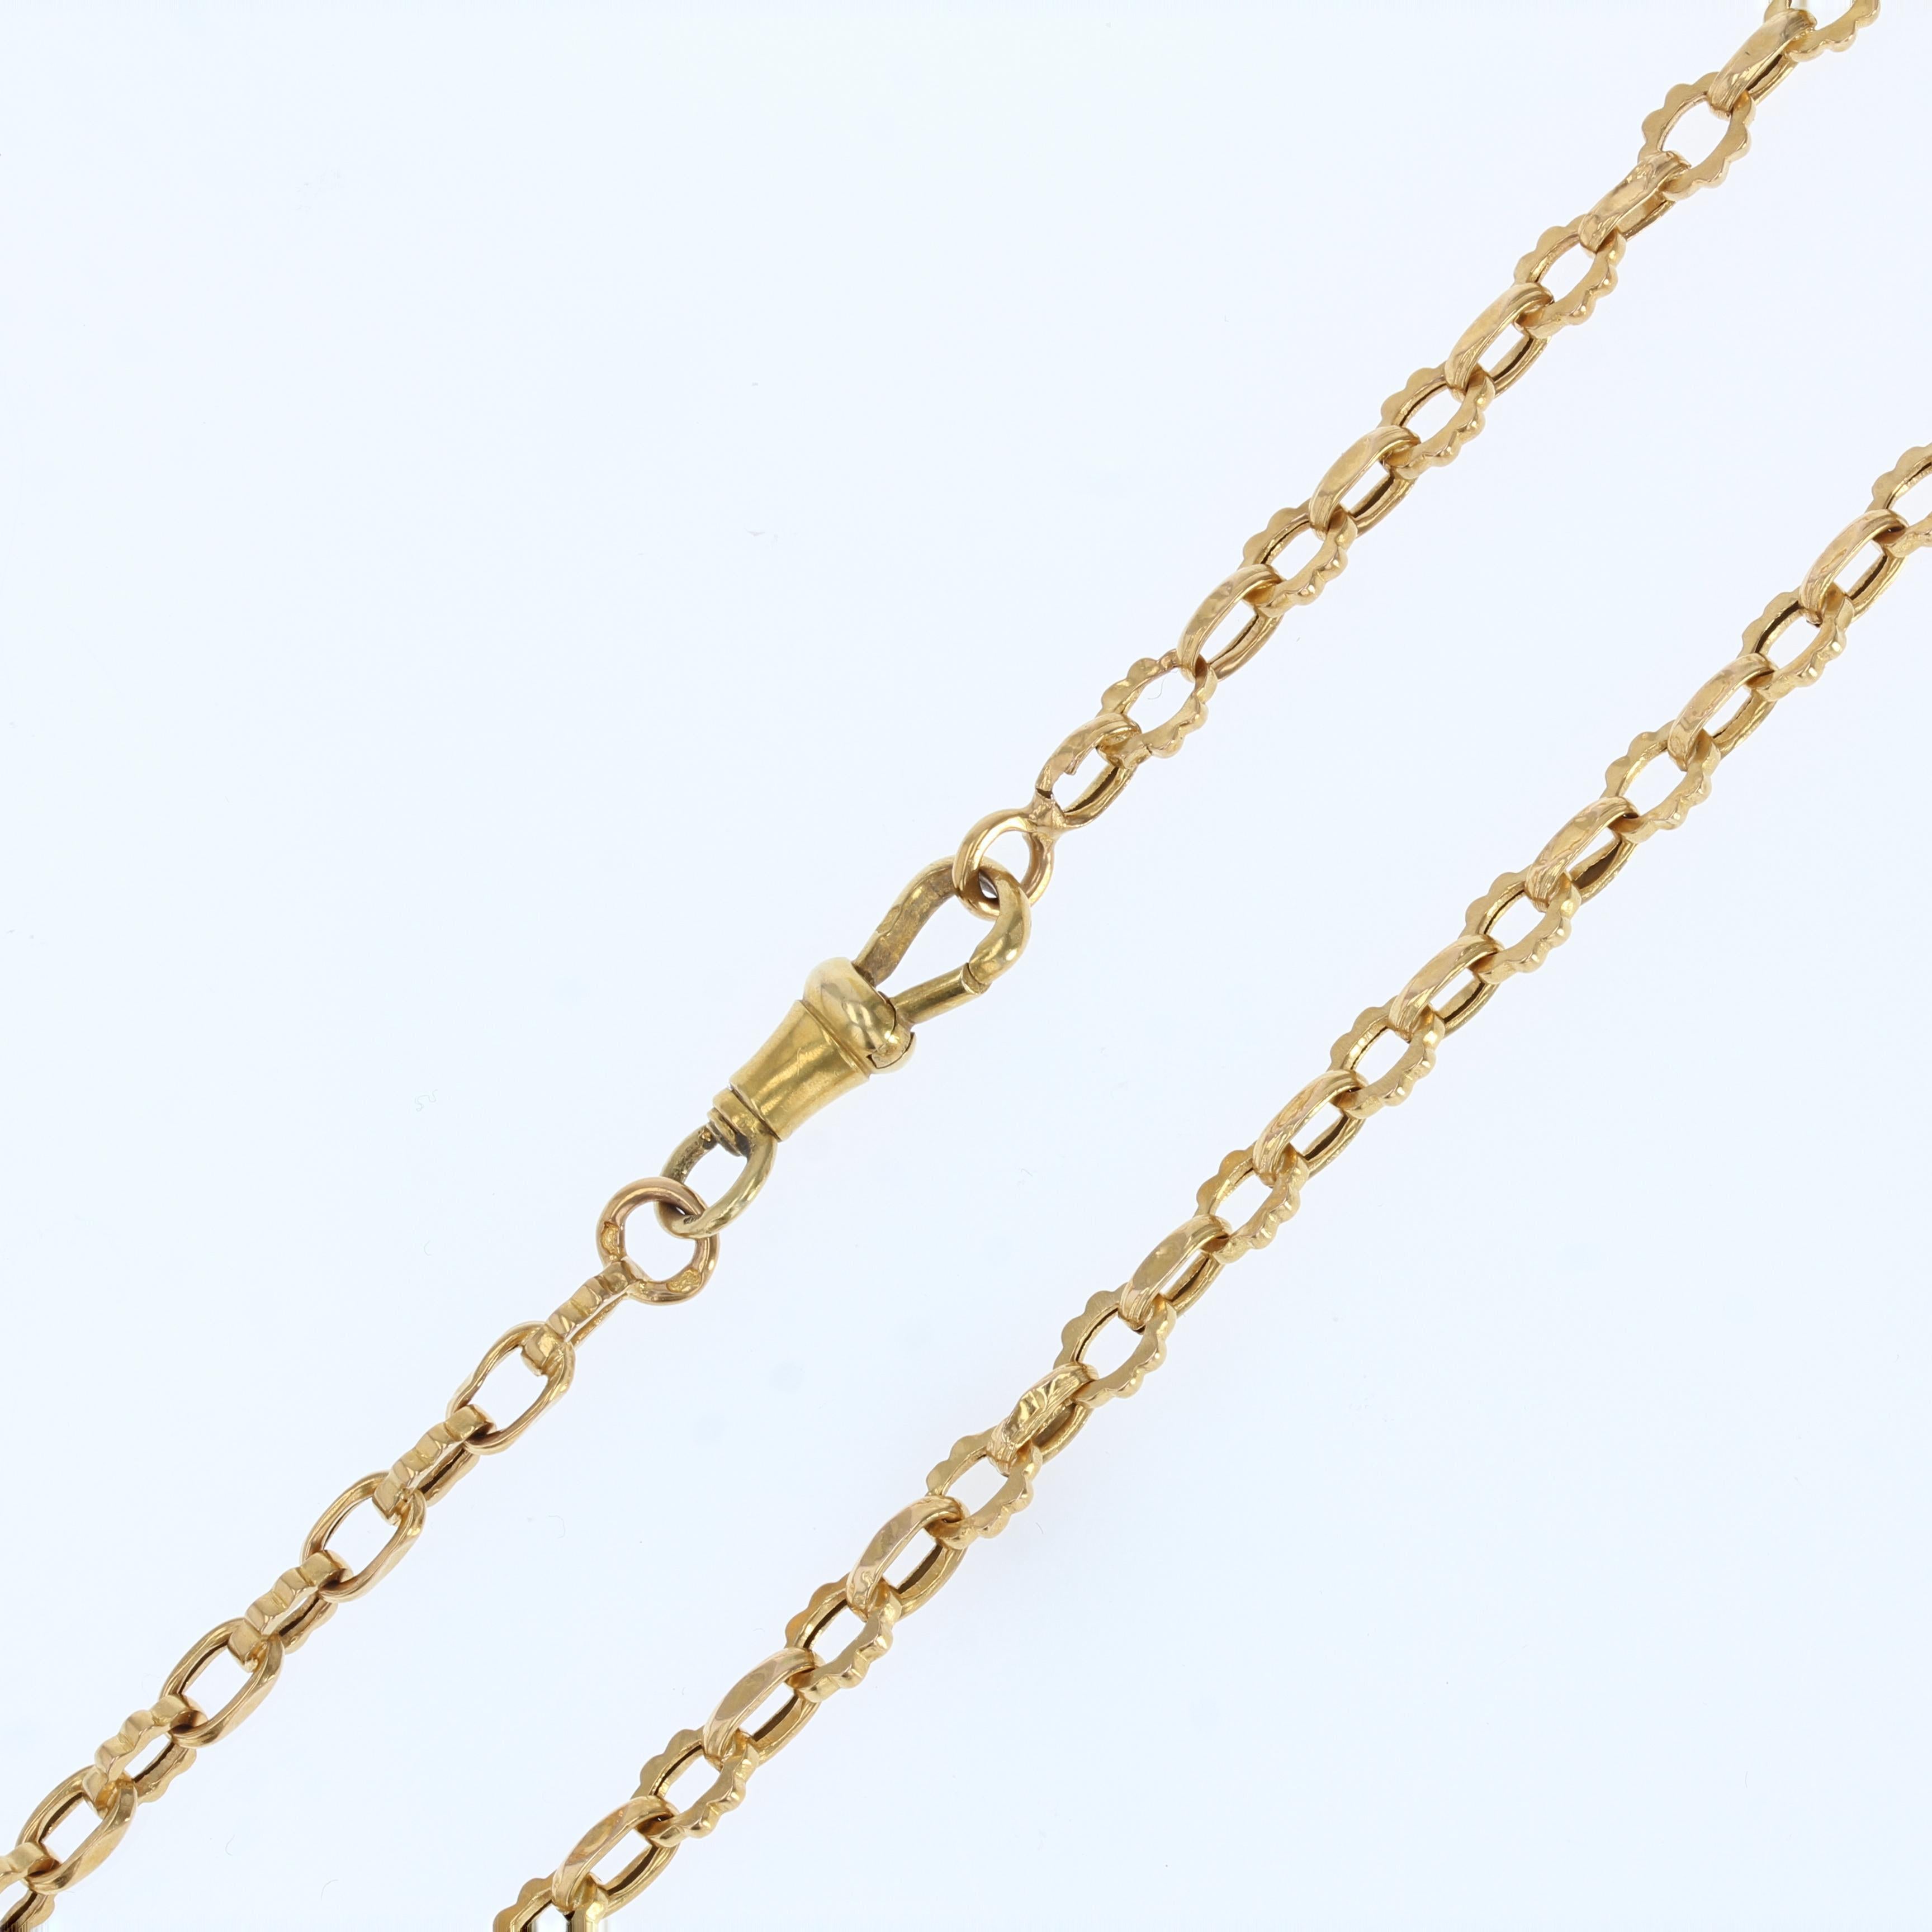 French 1830s 18 Karat Yellow Gold Chiseled Mesh Long Necklace For Sale 2